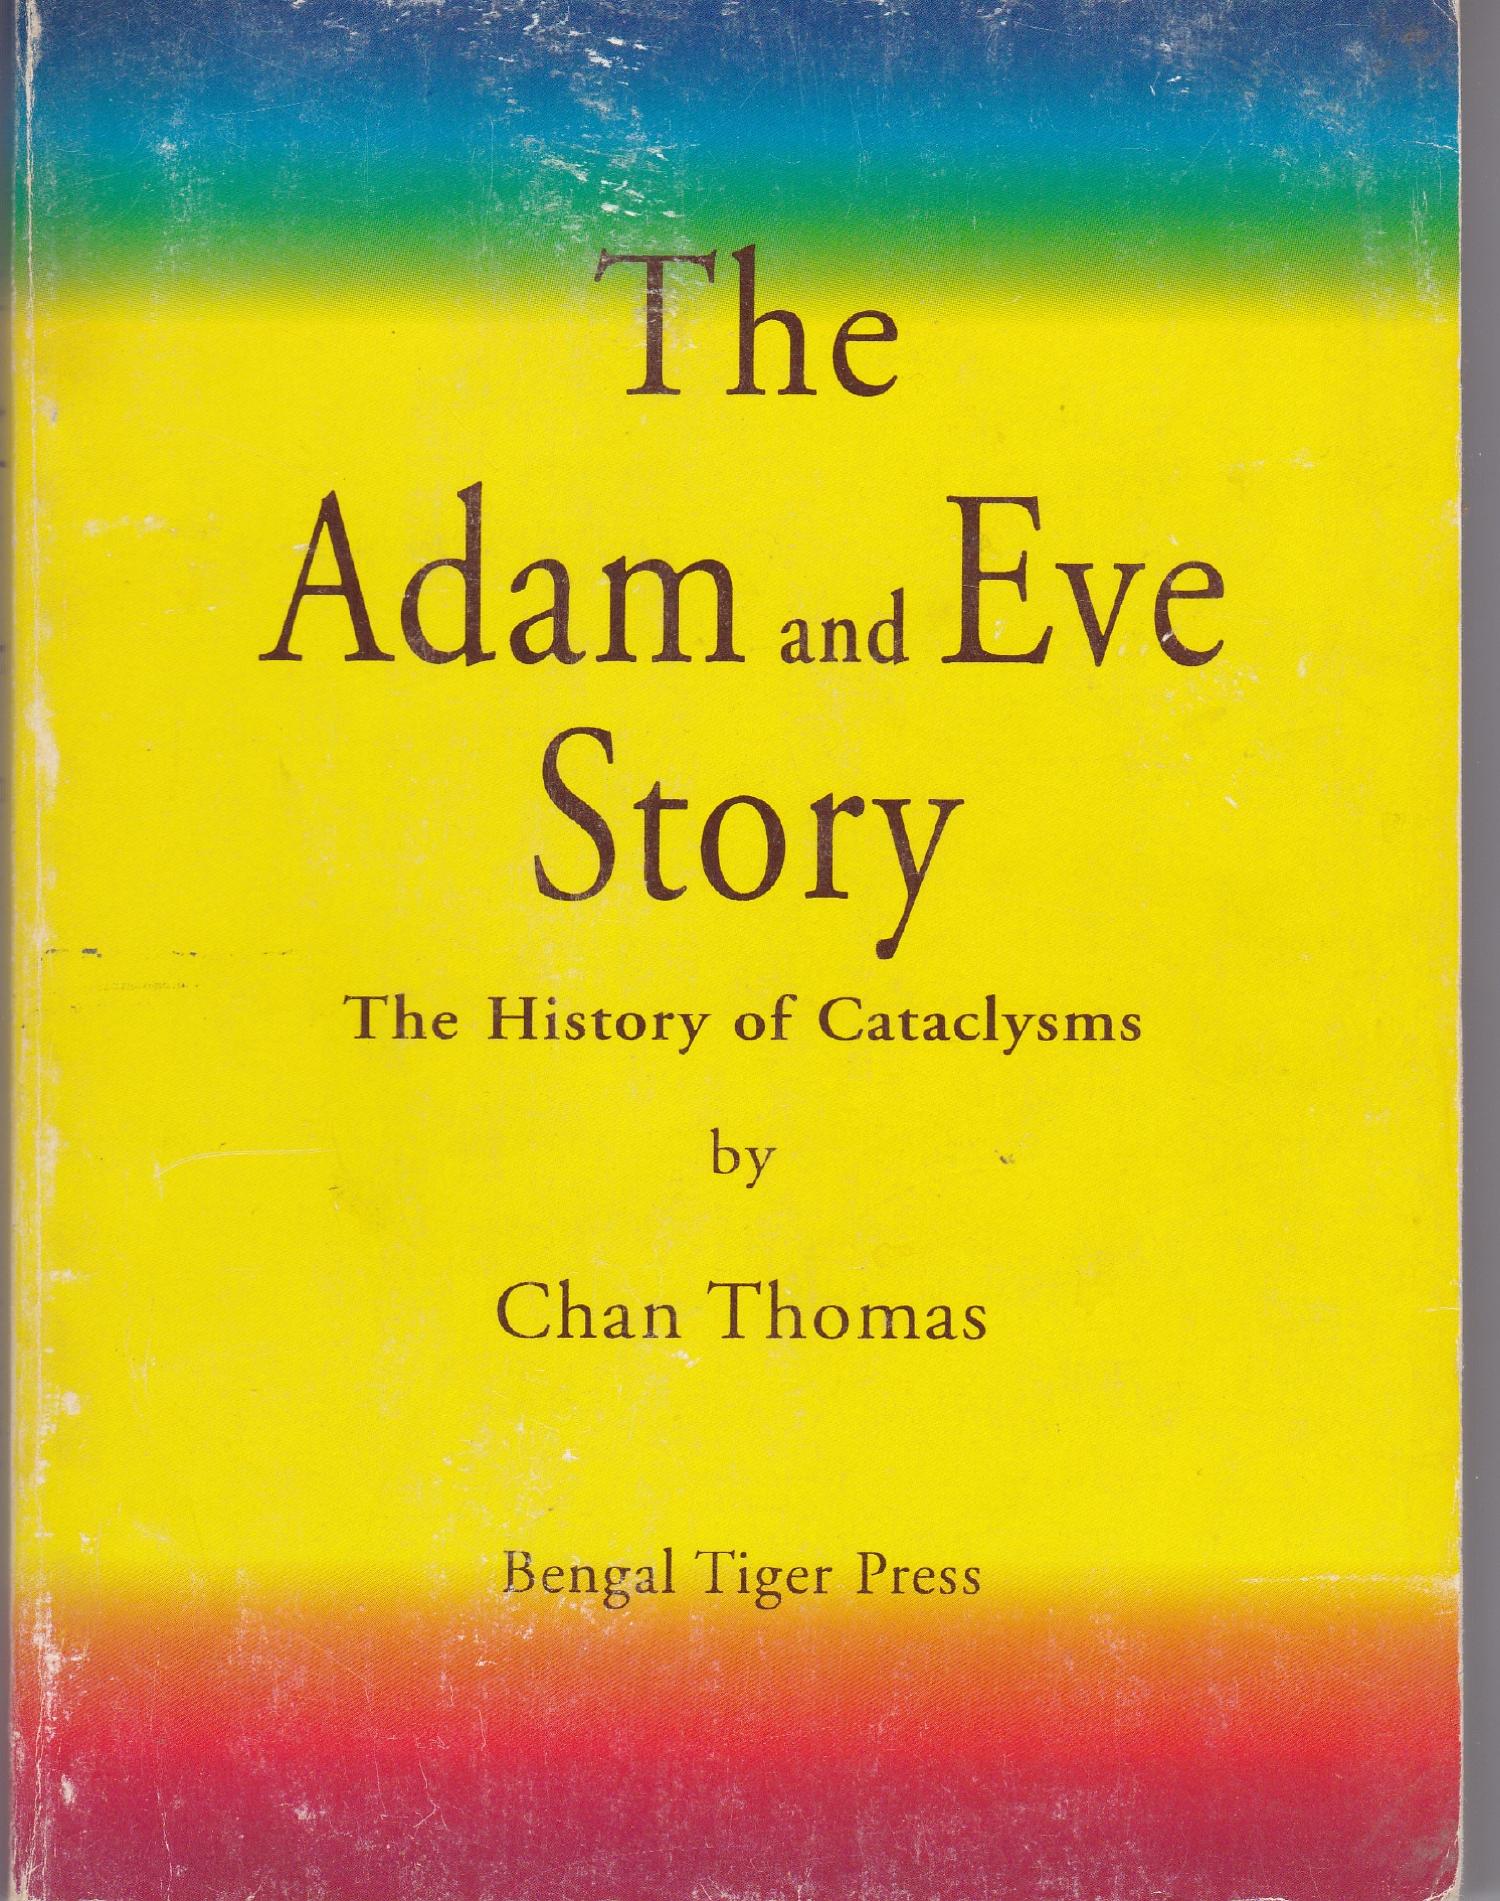 The adam and eve story chan thomas pdf